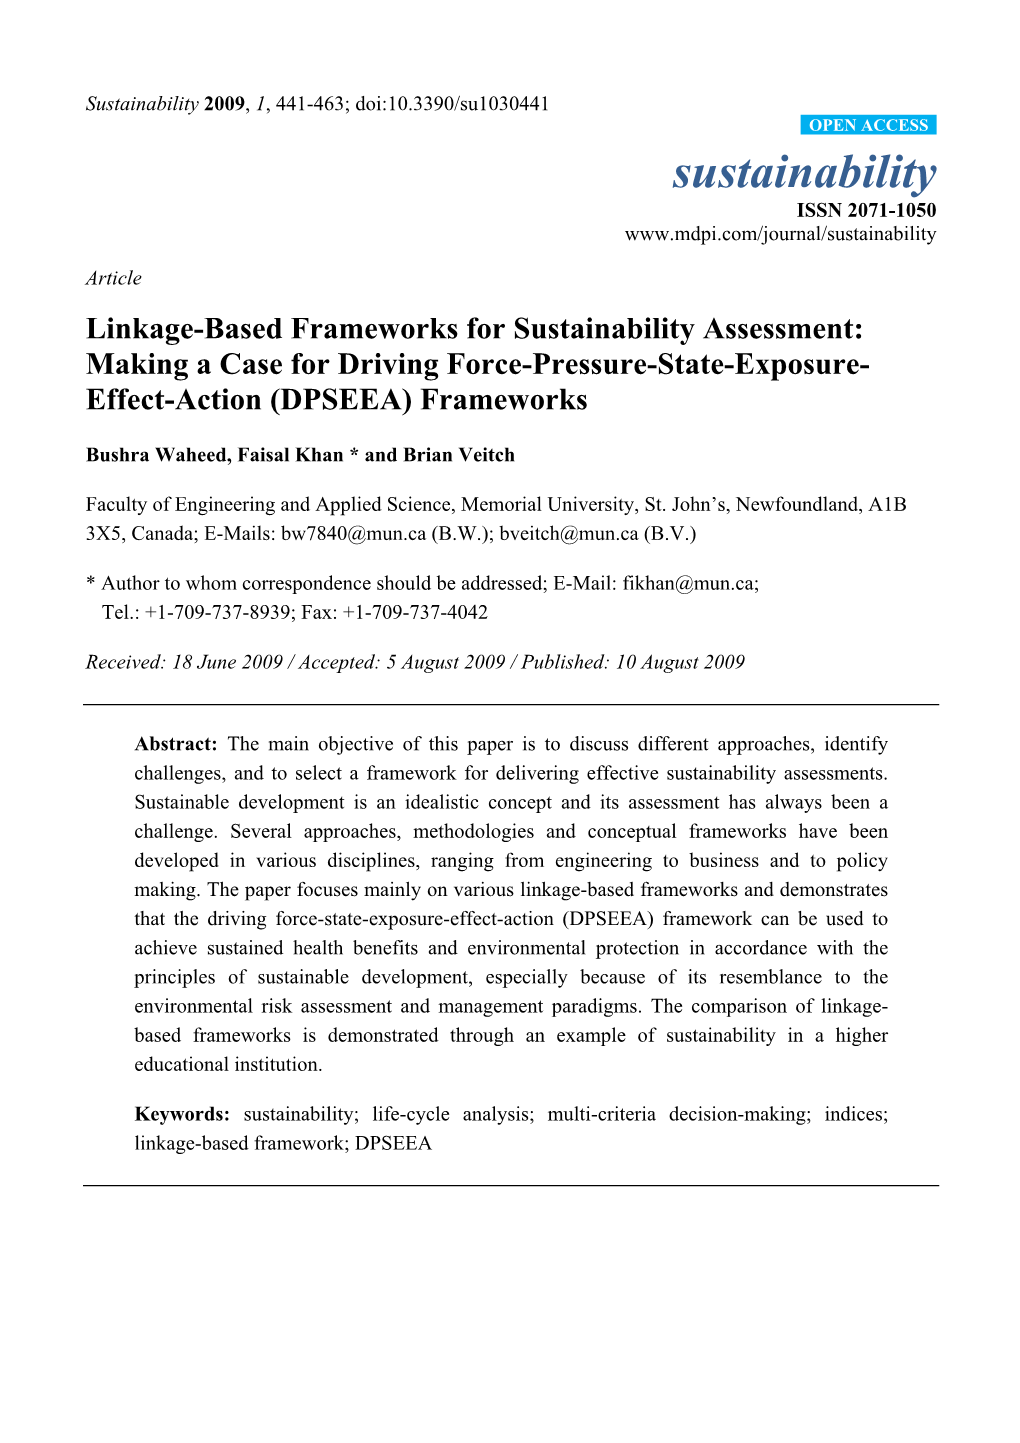 Linkage-Based Frameworks for Sustainability Assessment: Making a Case for Driving Force-Pressure-State-Exposure- Effect-Action (DPSEEA) Frameworks